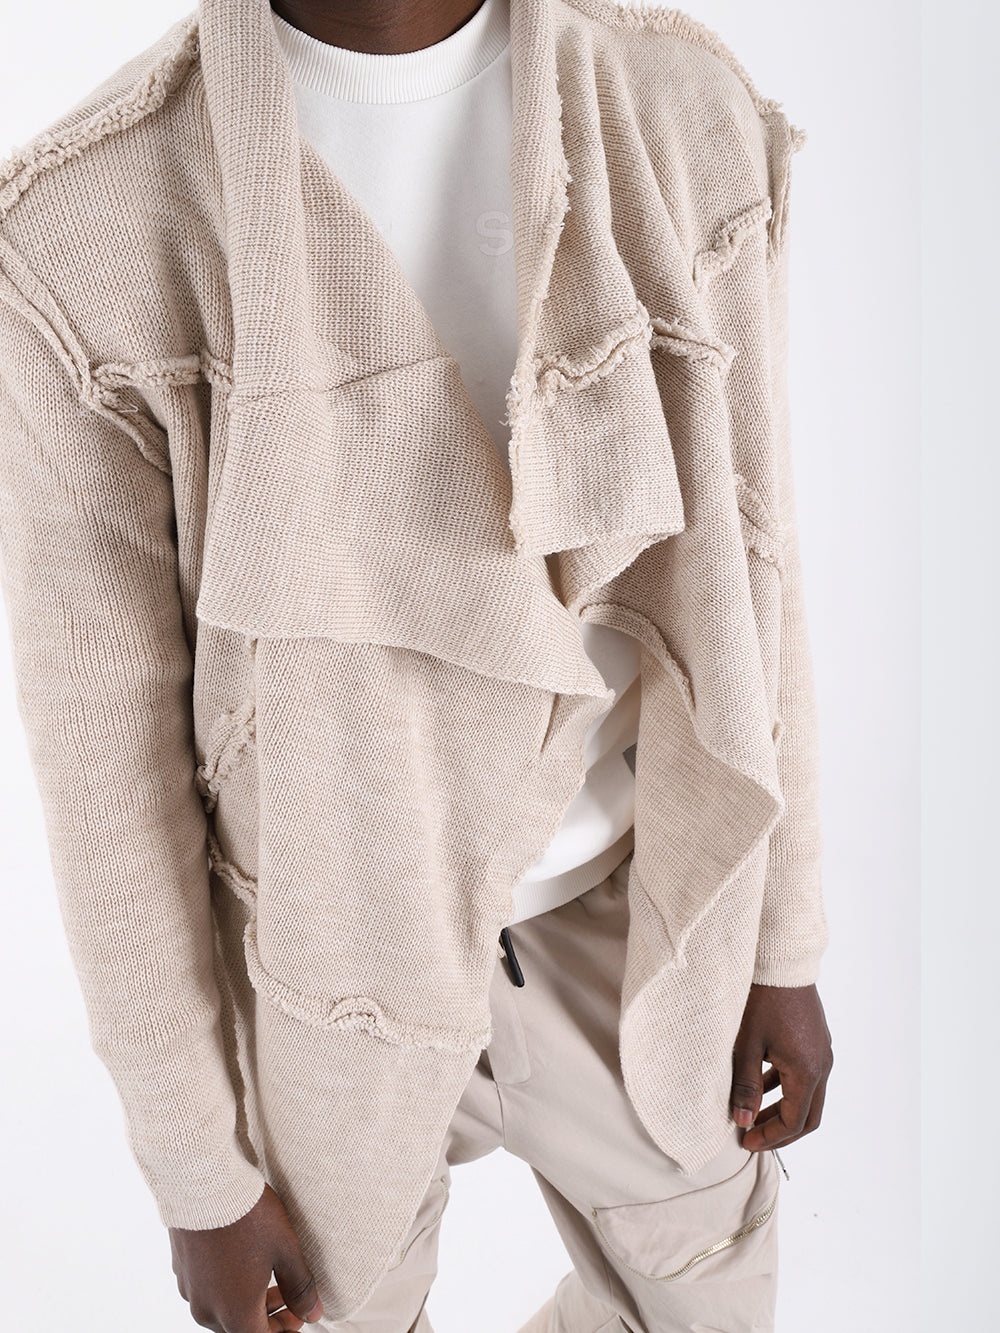 A man wearing the ASYMMETRIC SHORT CARDIGAN // IVORY with a true-to-size fit and khaki pants.